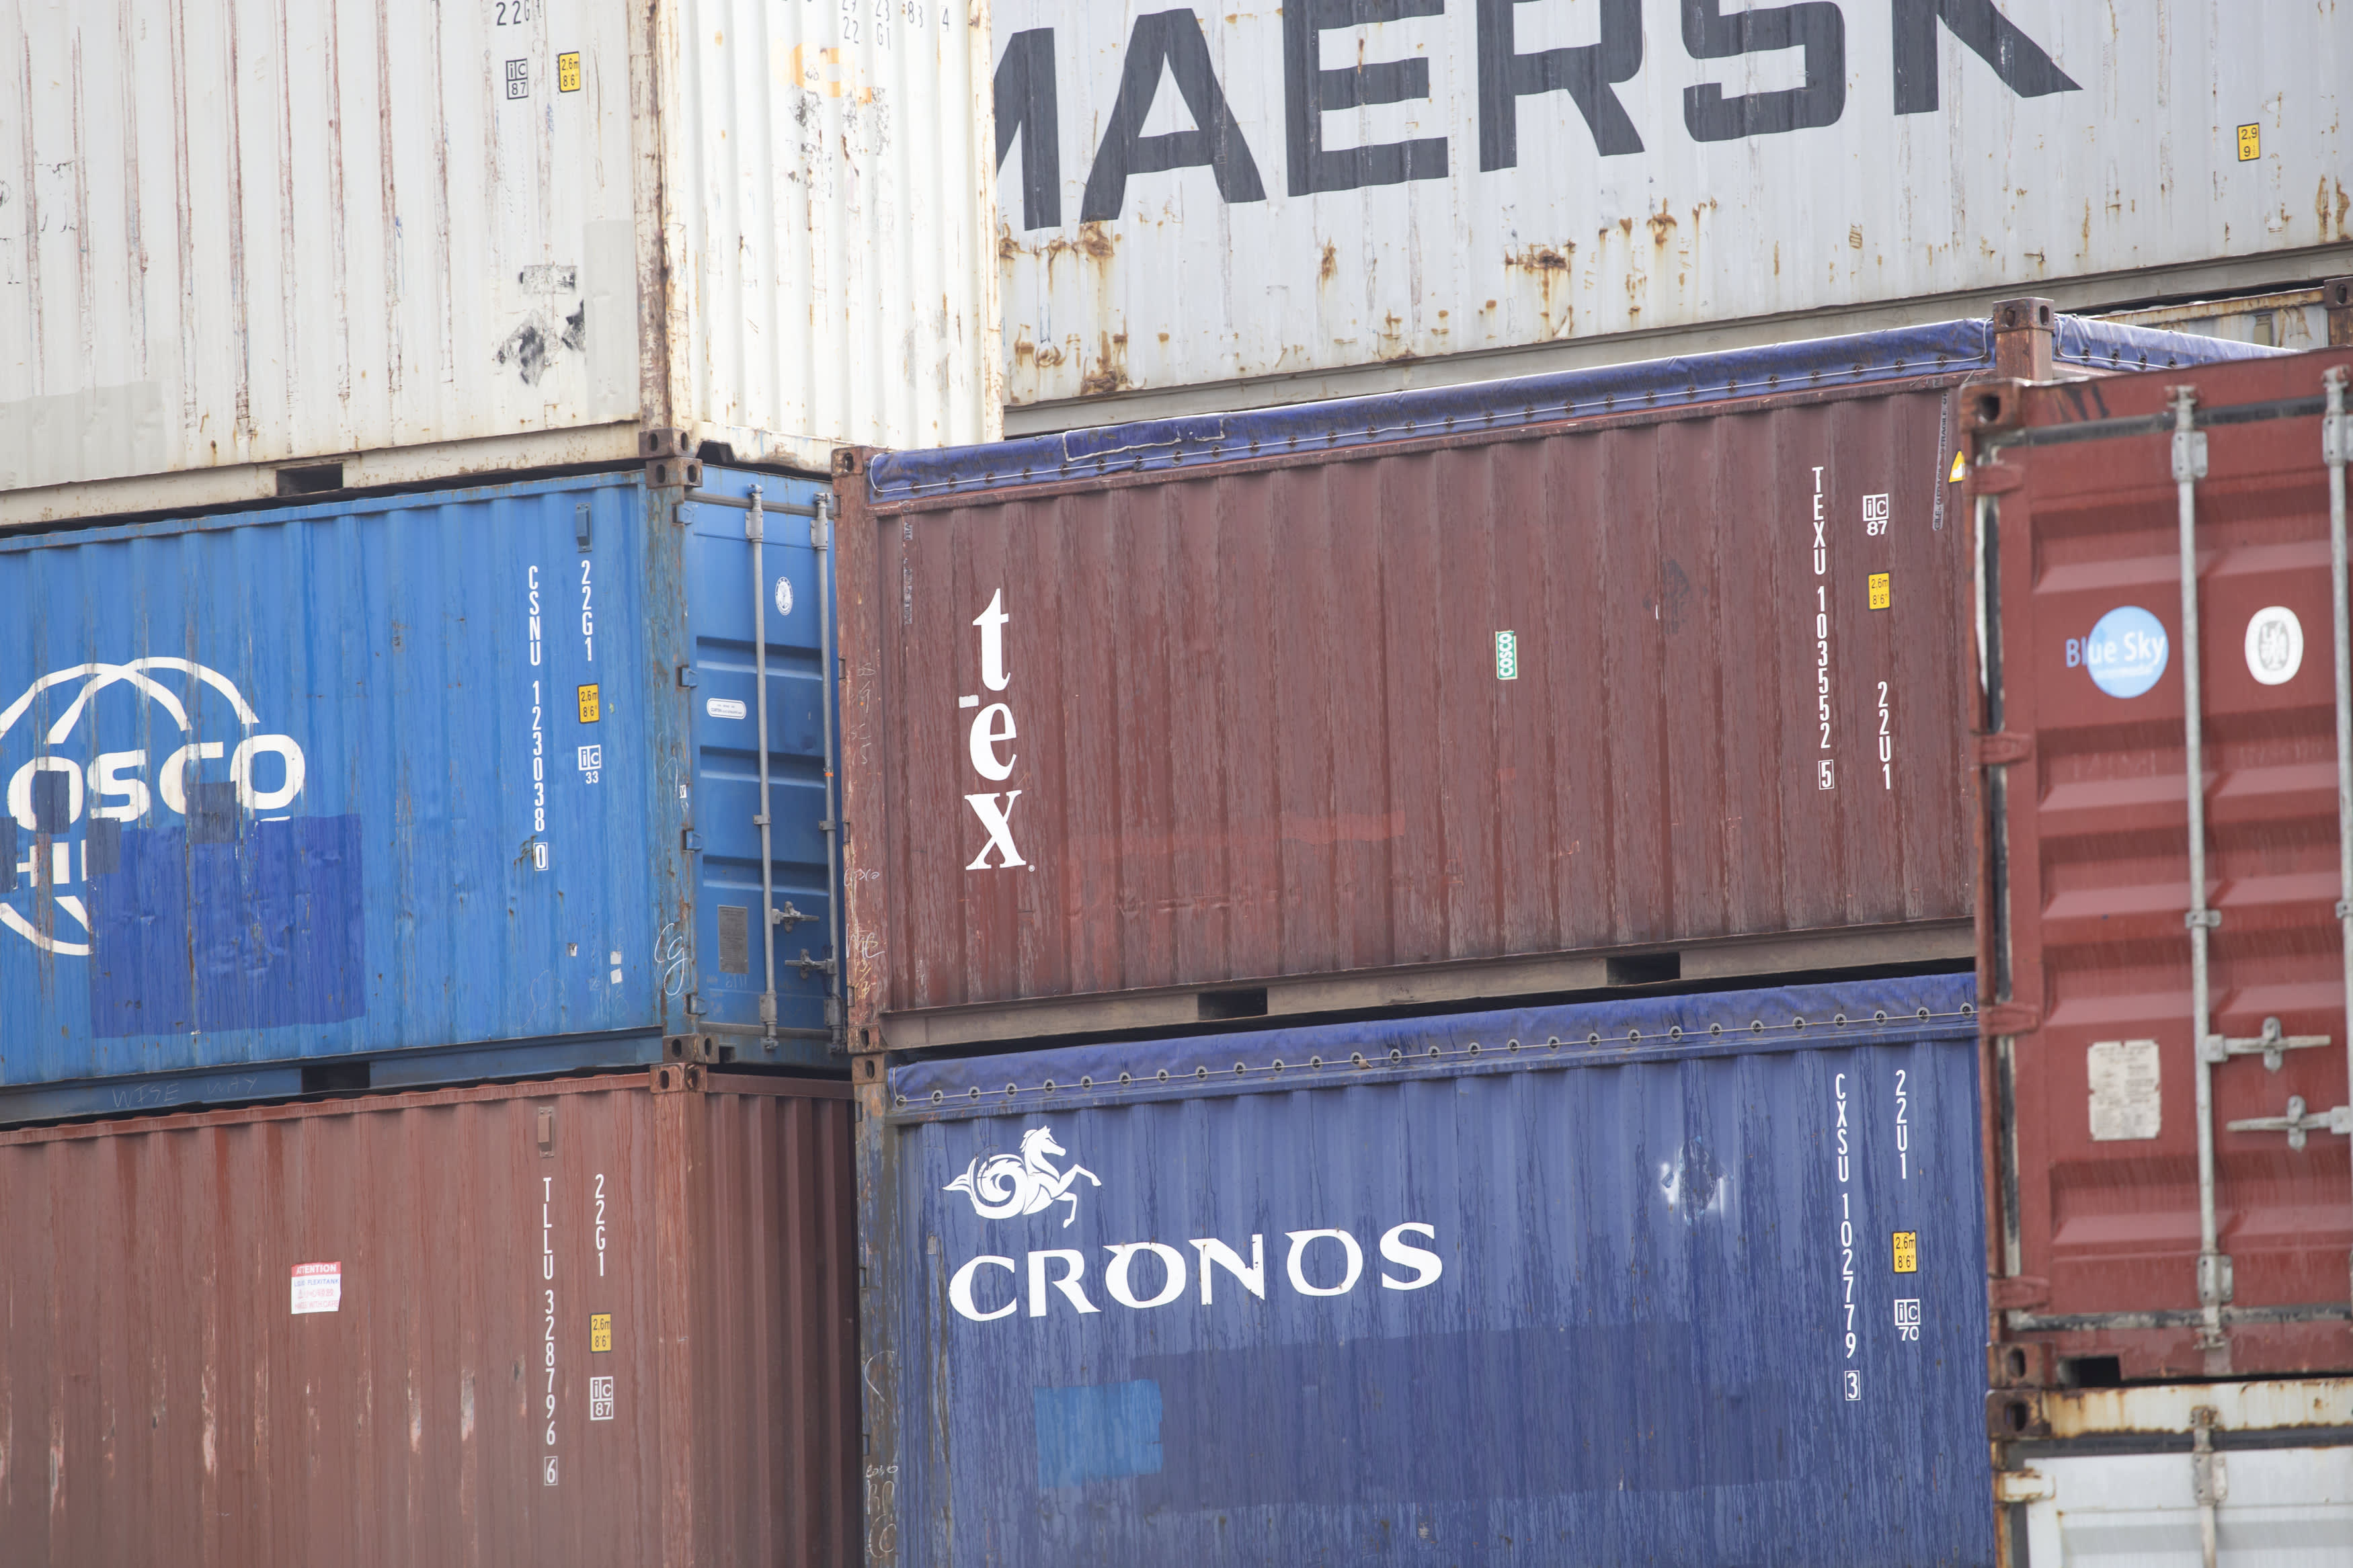 Why shipping containers can fuel inflation